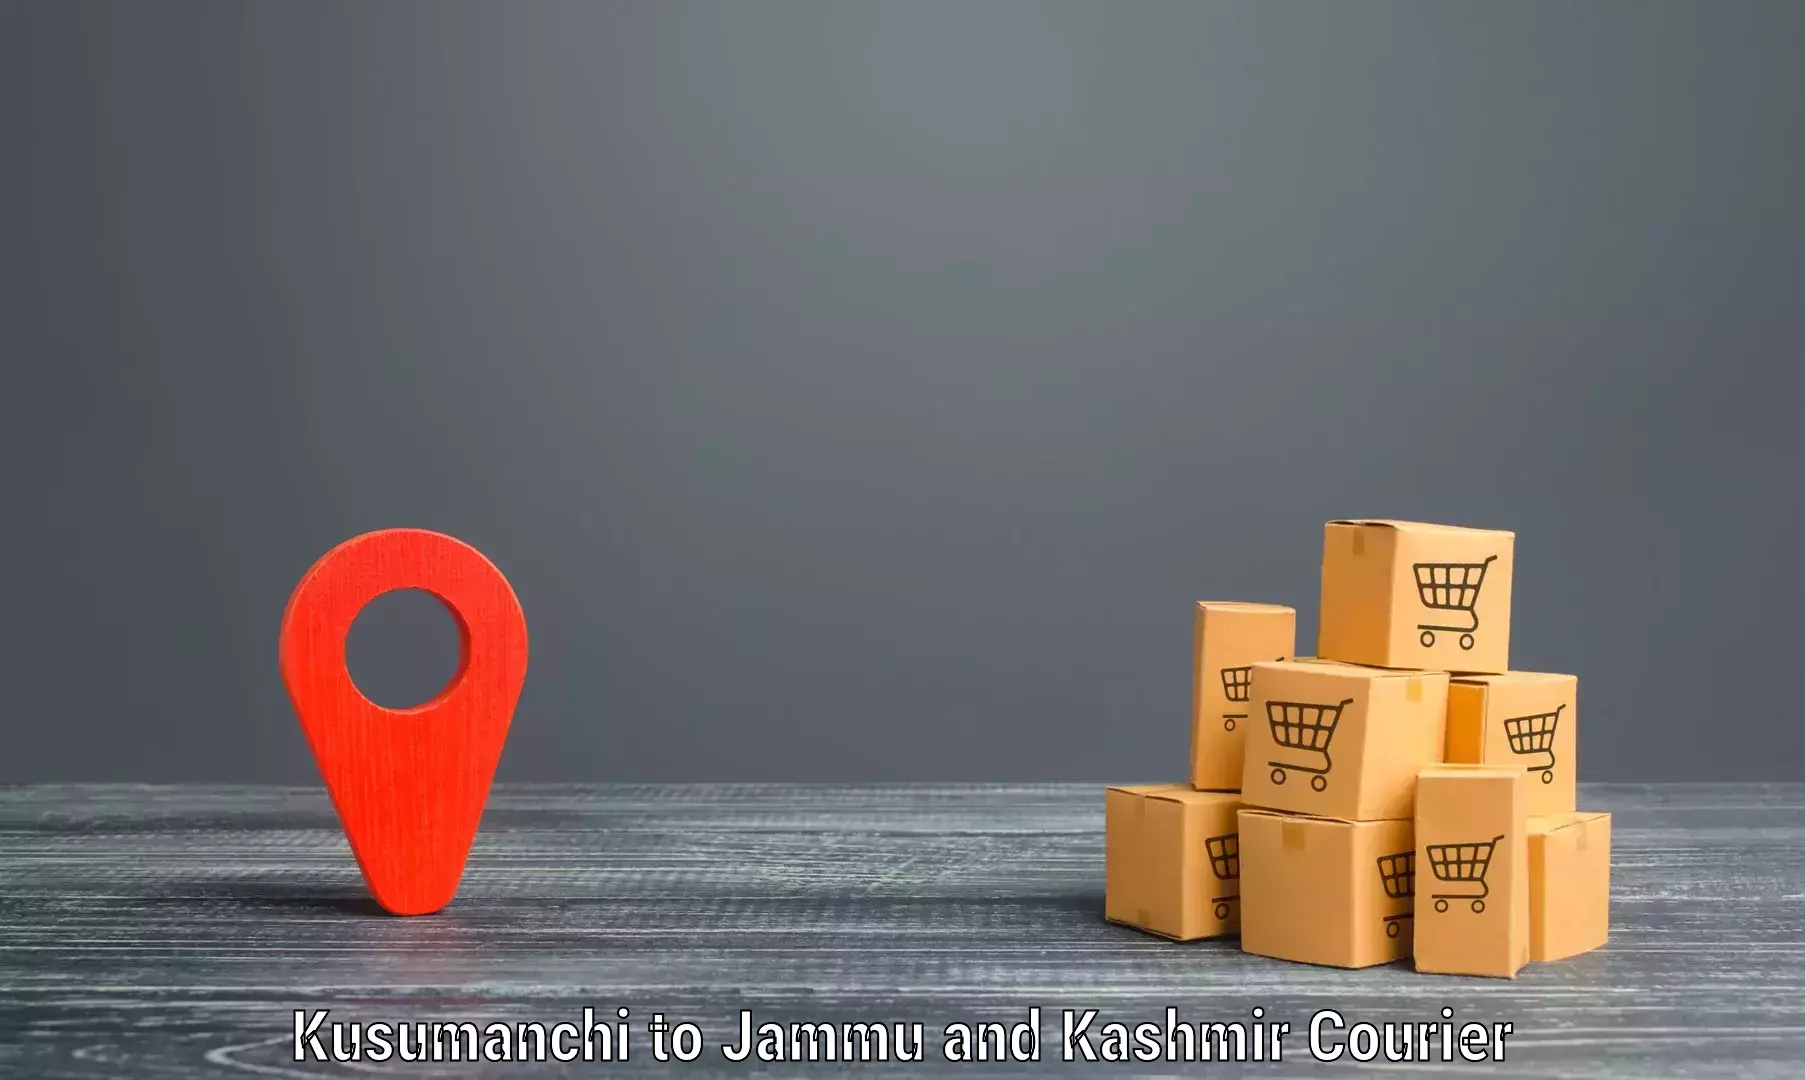 Package delivery network Kusumanchi to Rajouri